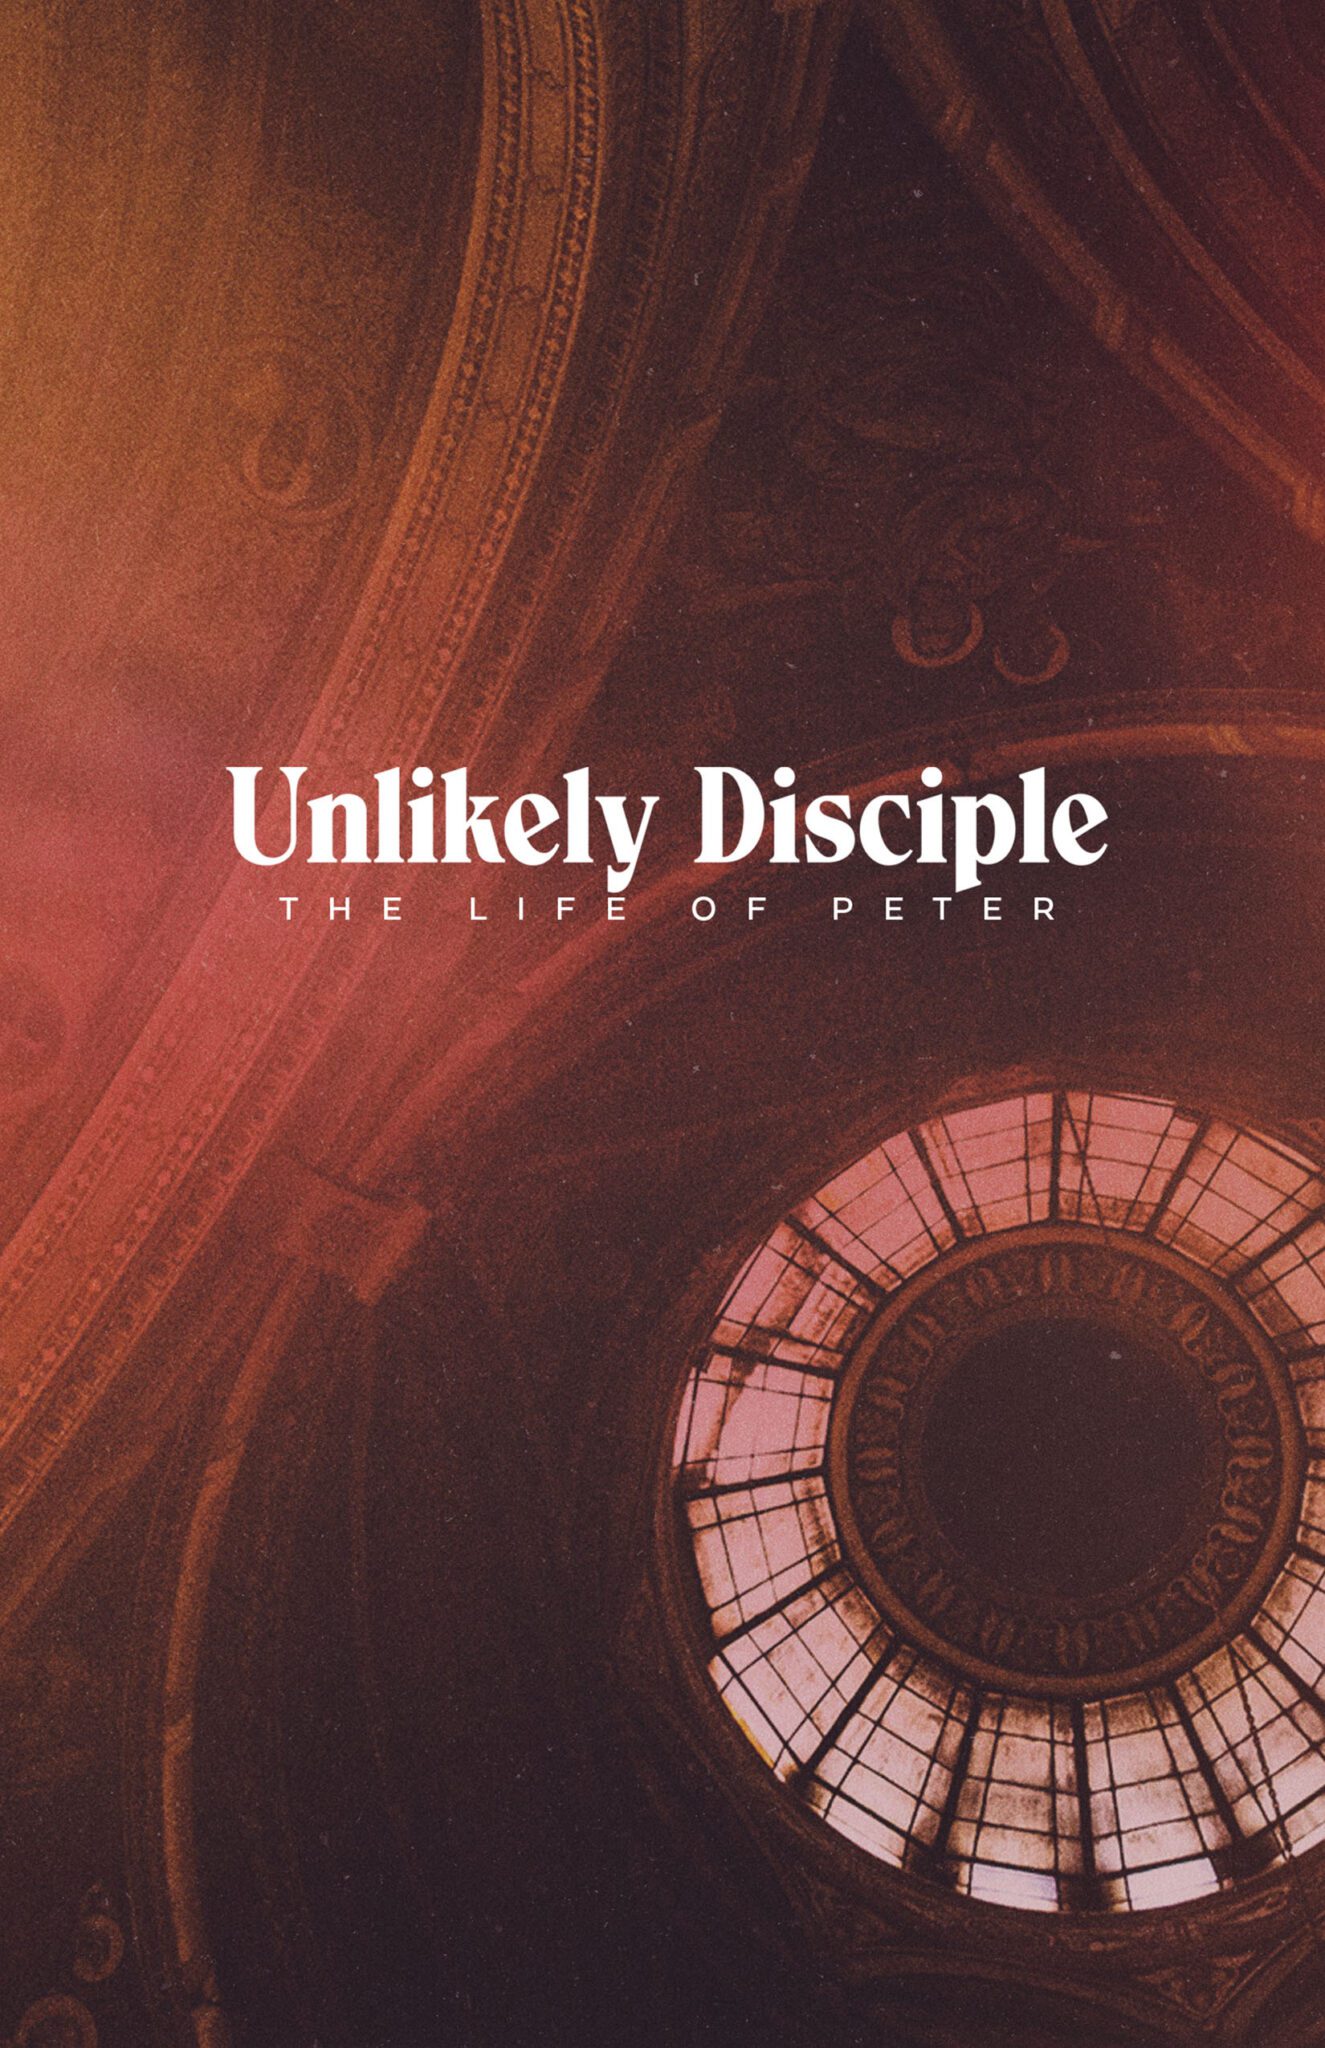 Unlikely Disciple: The Rock Gets Rolling